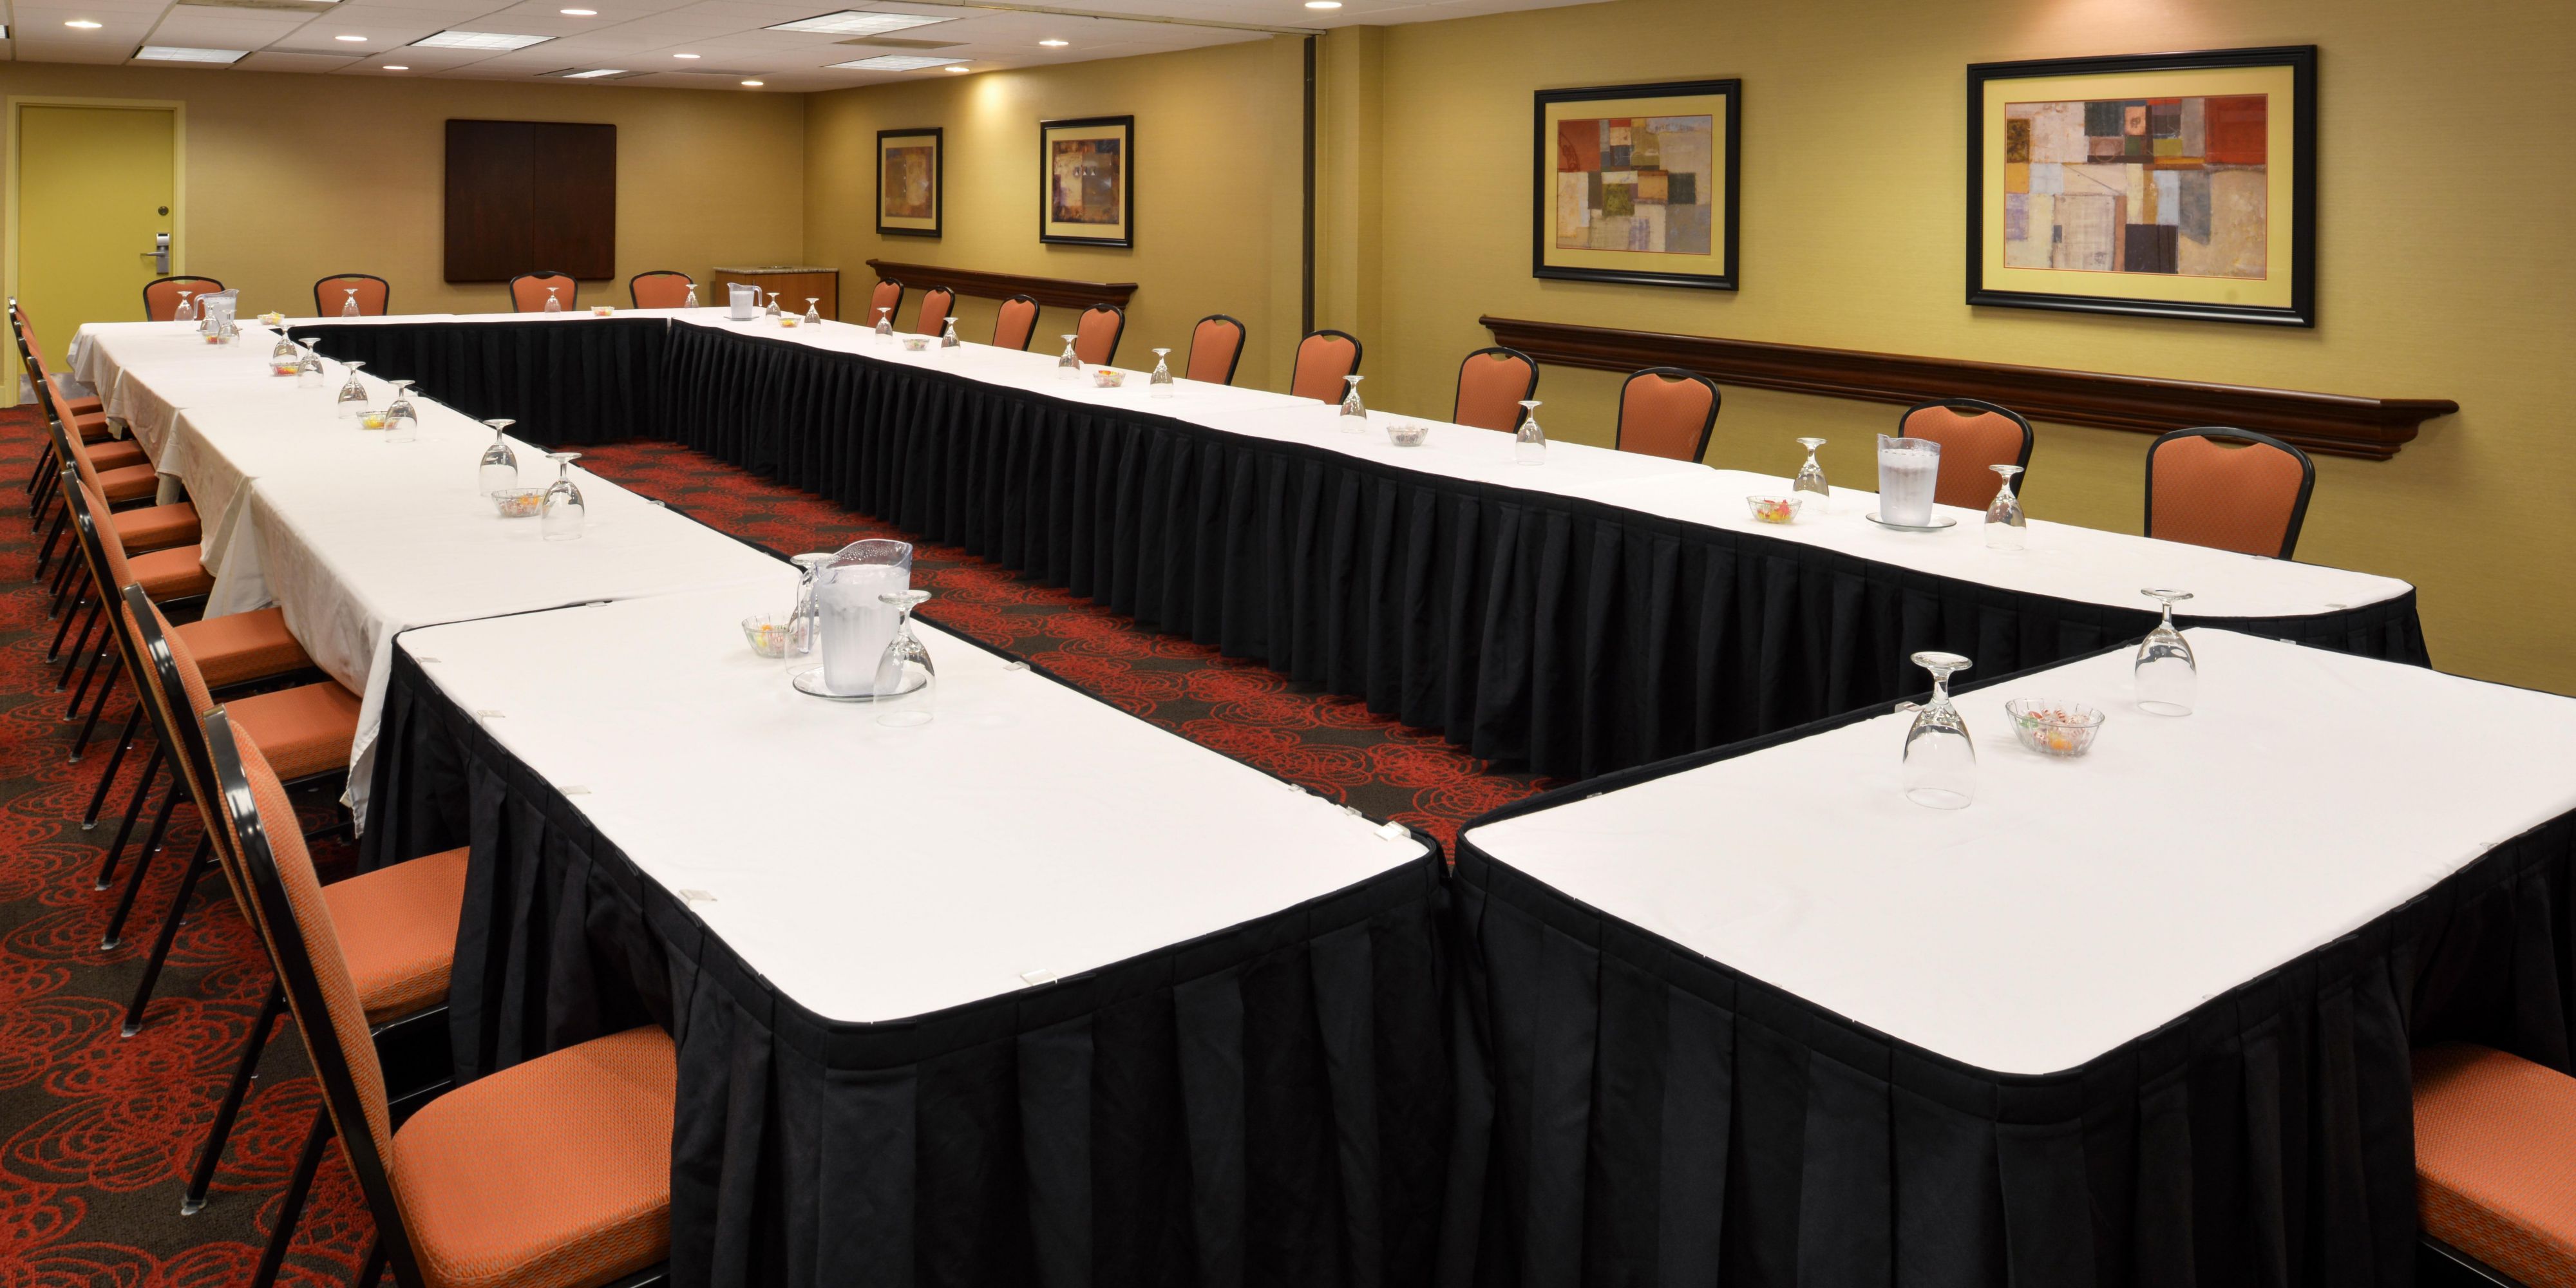 Looking to host a corporate event? Need meeting space? We might have the perfect set up for you. Please contact our Director of Sales Laura Tews for more information. 